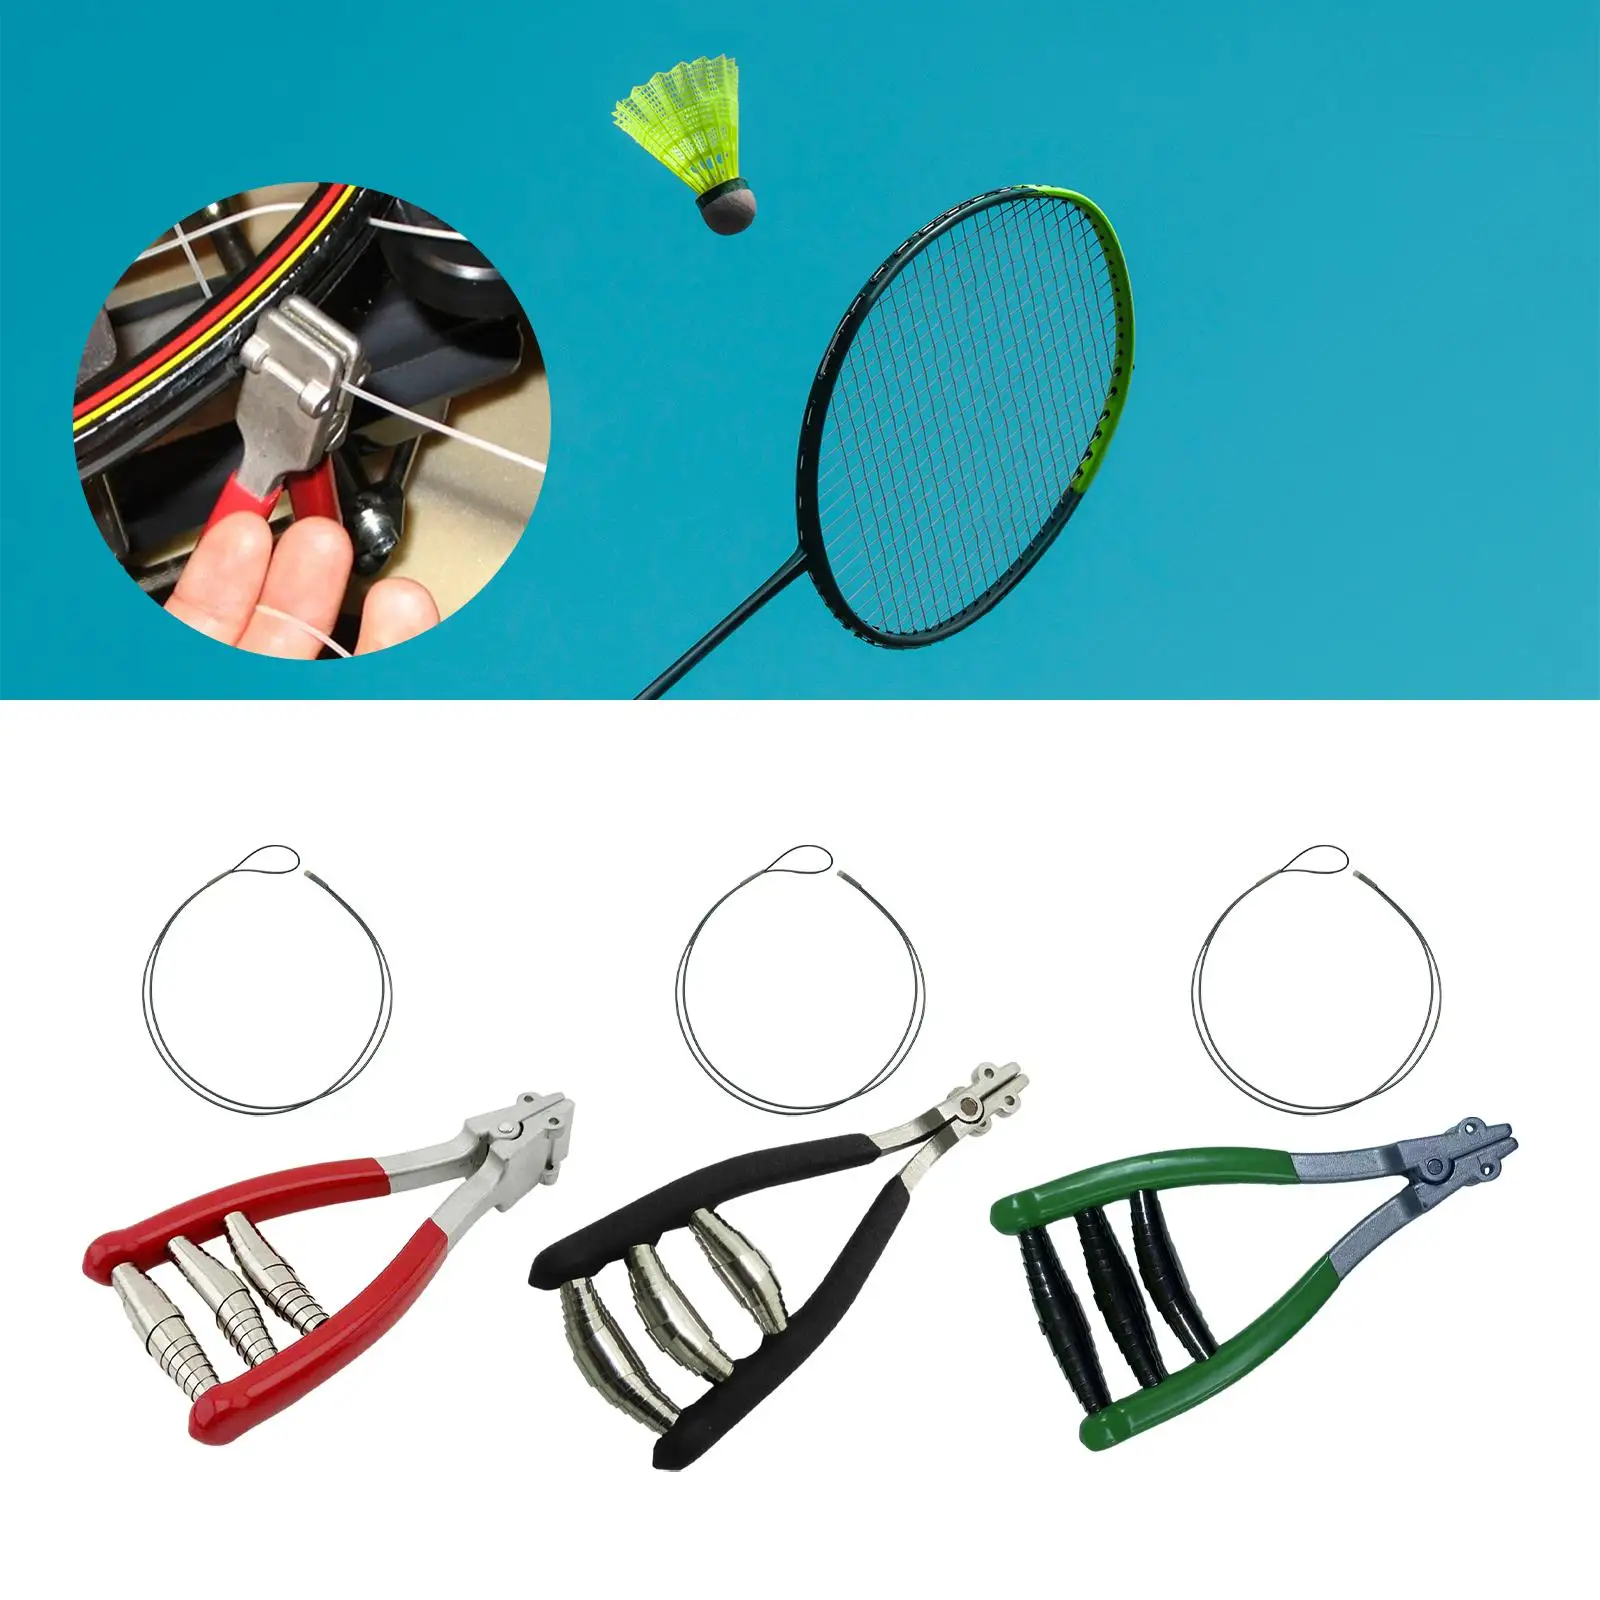 Starting Clamp Stringing Clamp 3 Spring Starter Clamp Wide Head Professional for Tennis Racquet Squash Badminton Accessories